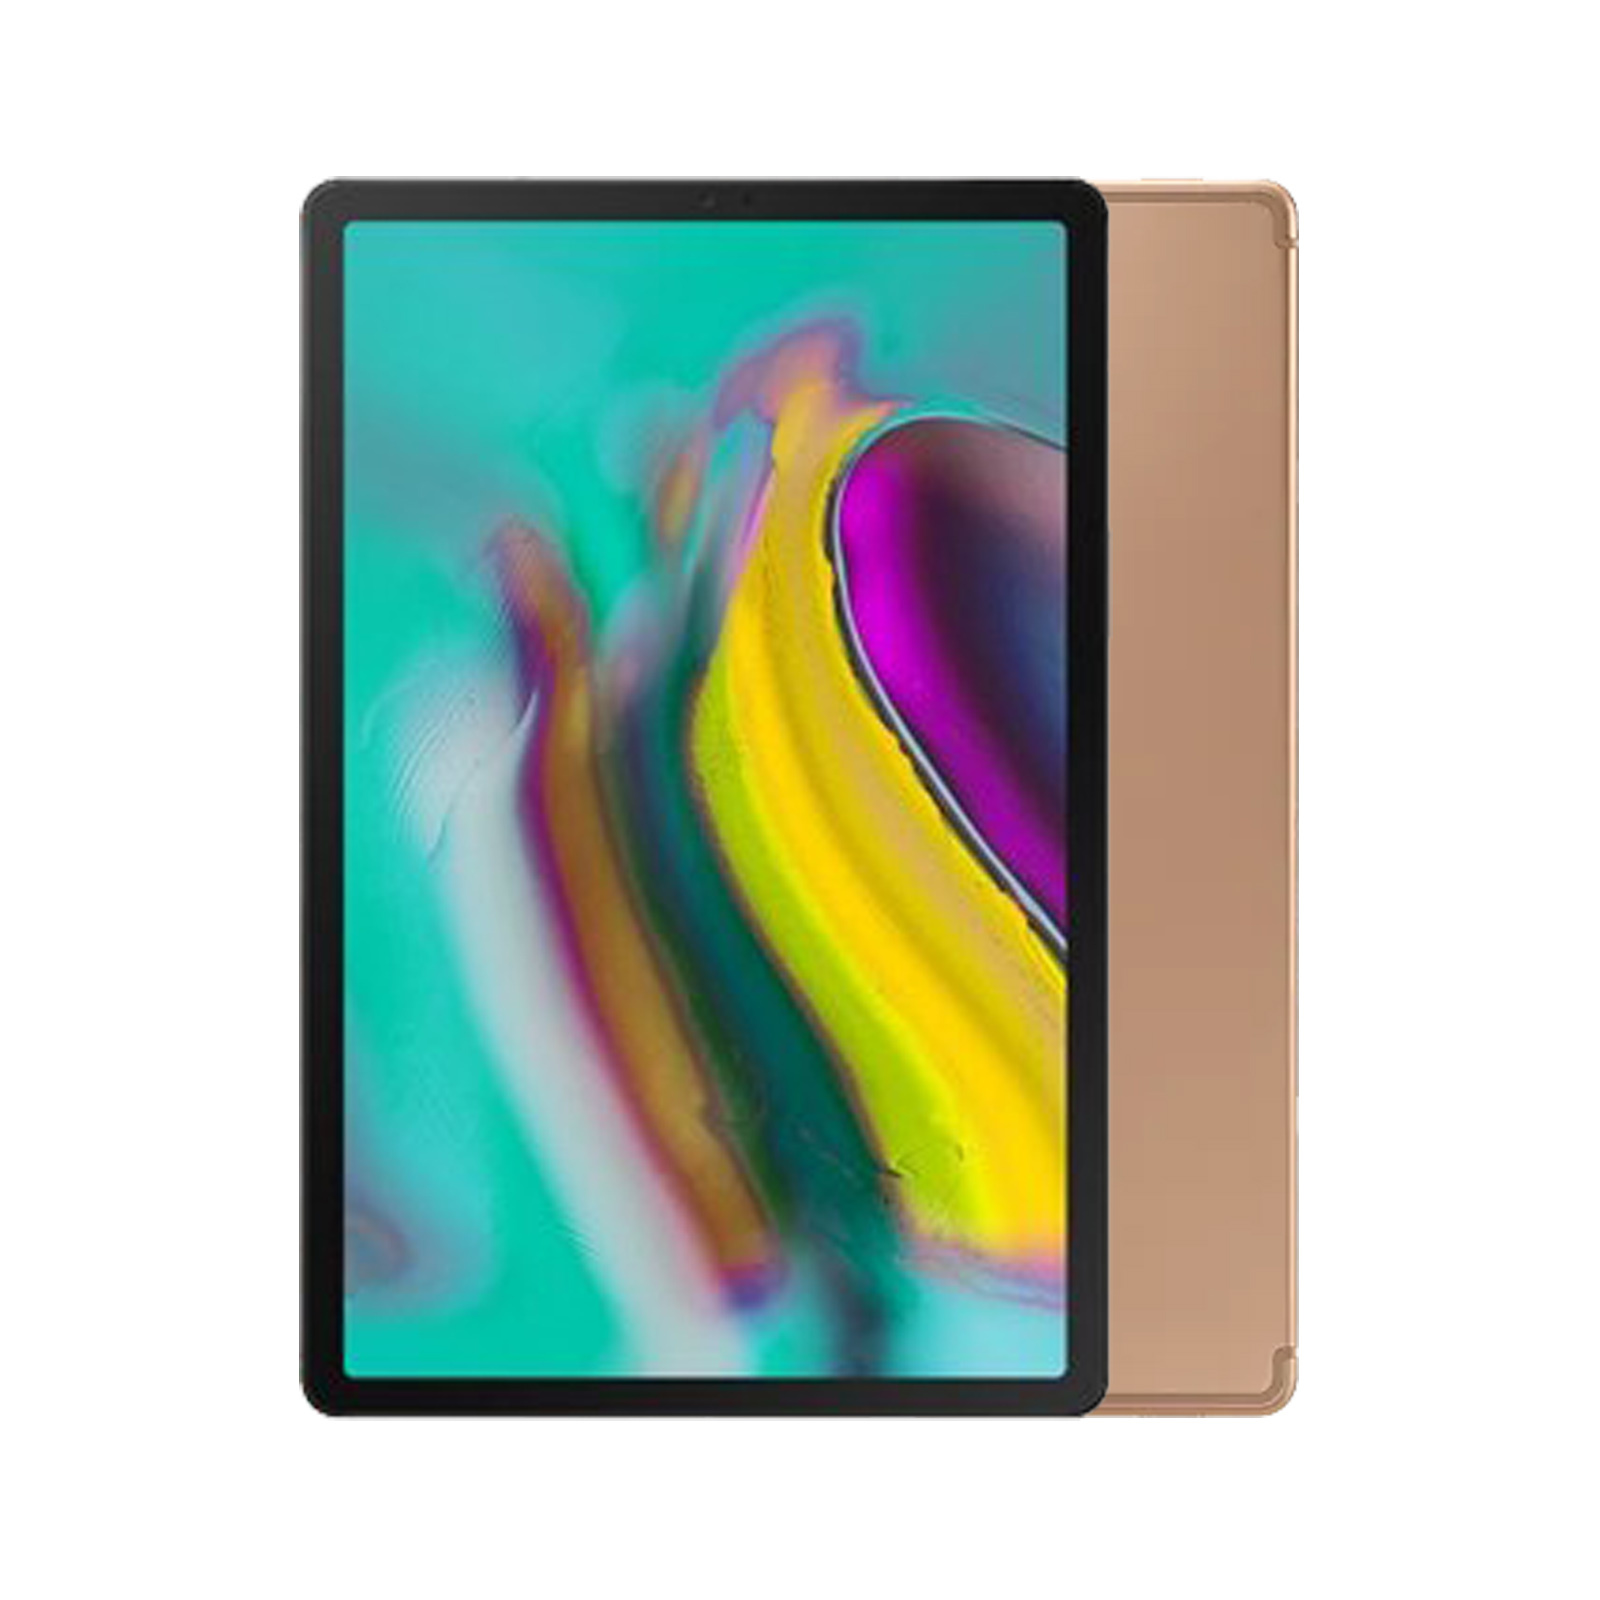 Samsung Galaxy Tab S5e 10.5 [Wi-Fi Only] Only] [64GB] [Gold] [As New]